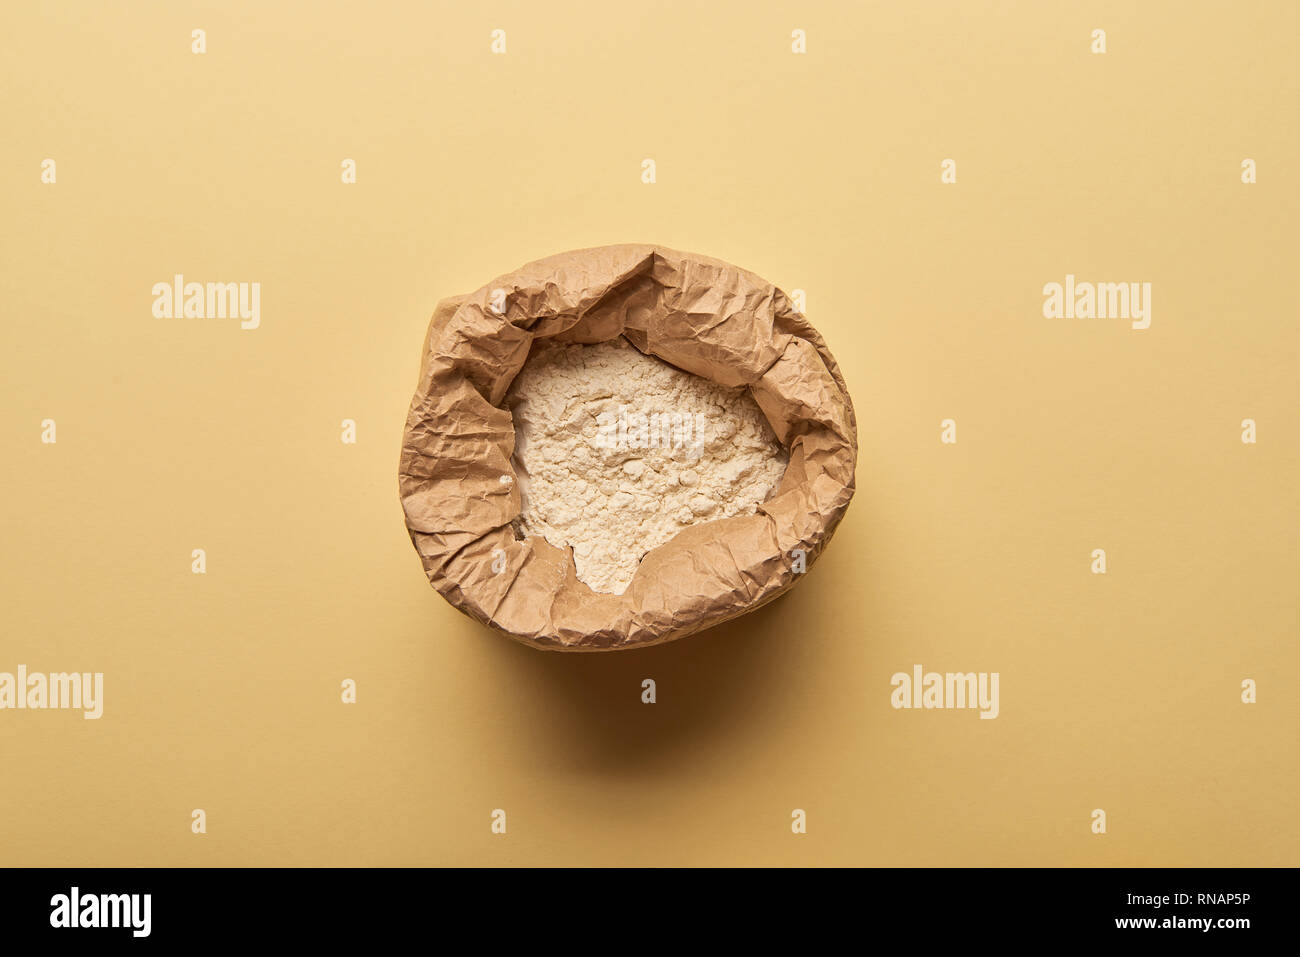 Download Top View Of Paper Bag Full Of Flour On Yellow Background Stock Photo Alamy PSD Mockup Templates